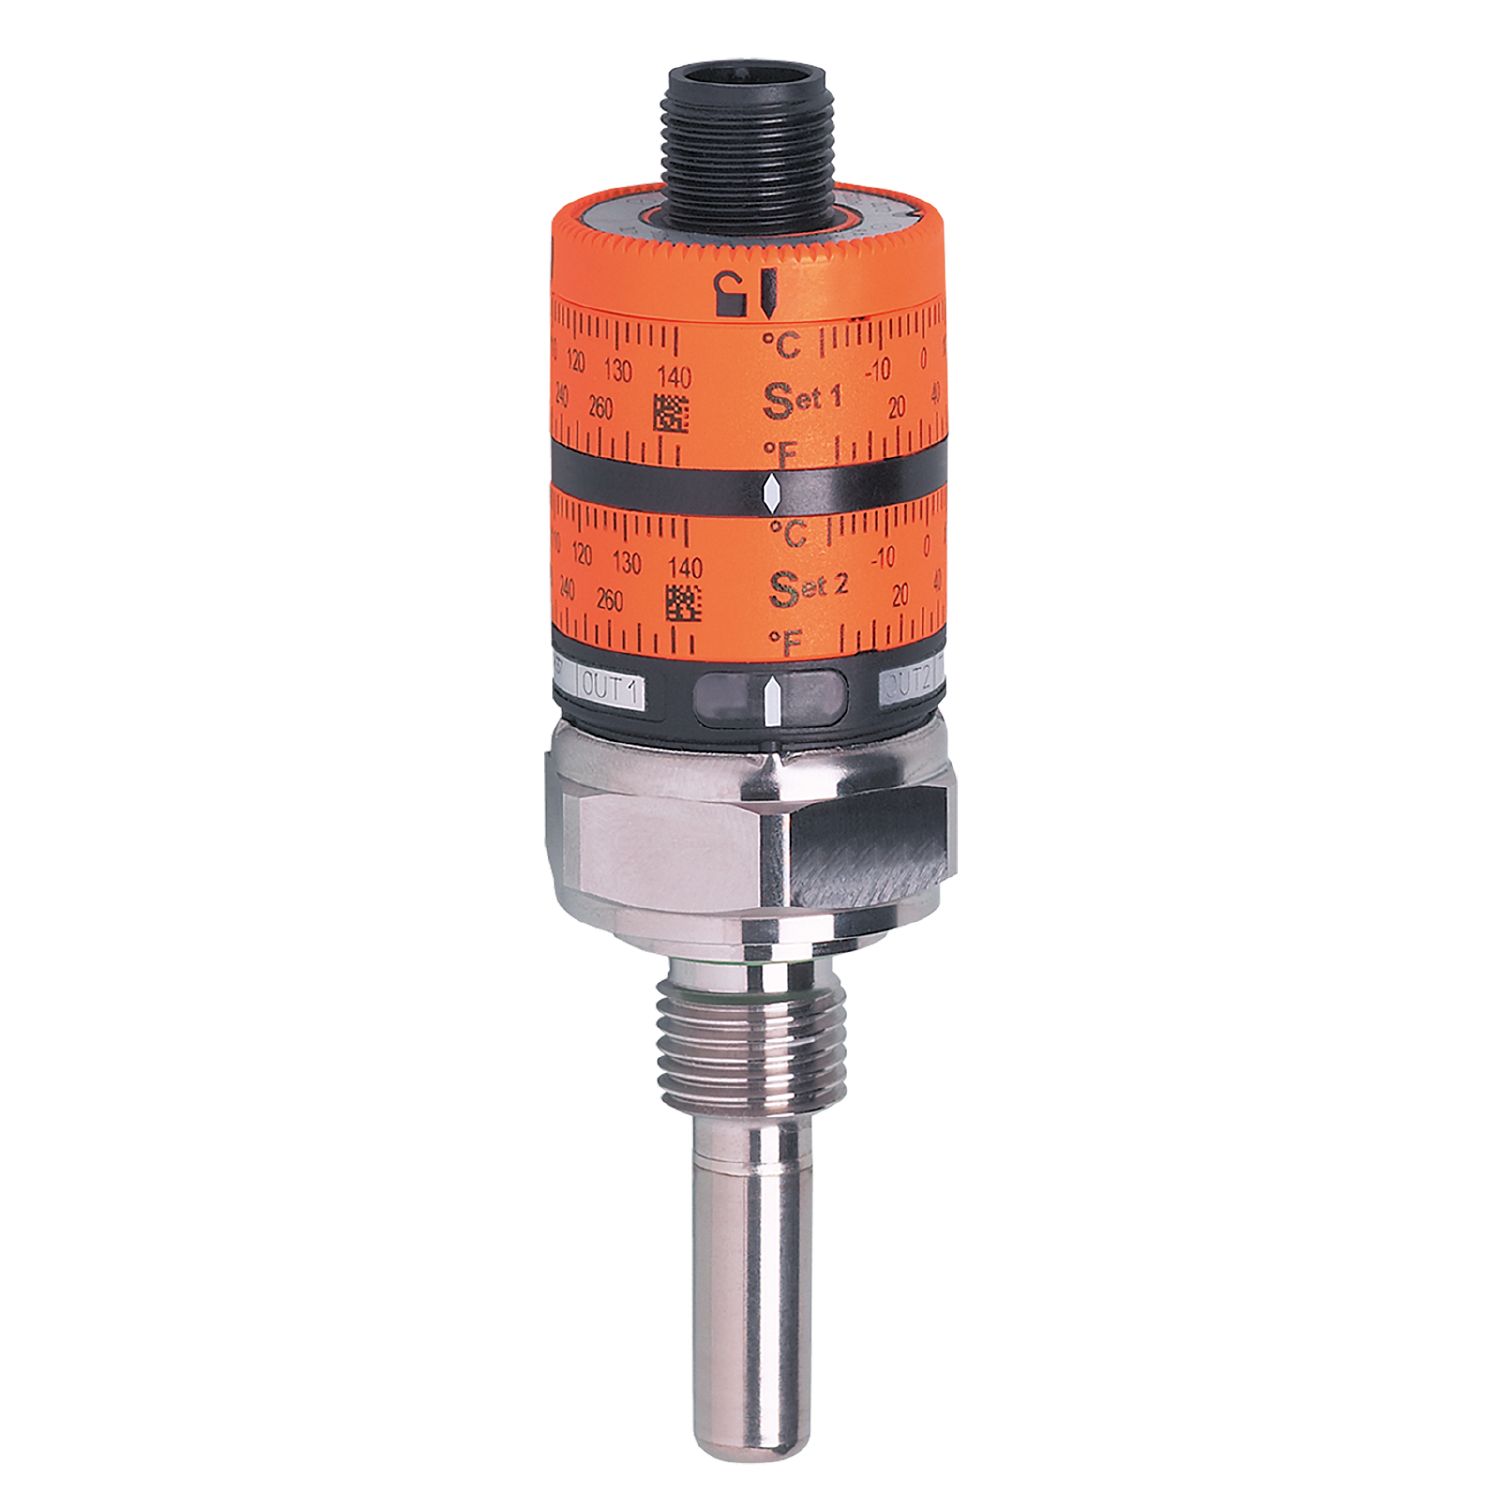 TK7130 - Temperature switch with intuitive switch point setting - ifm